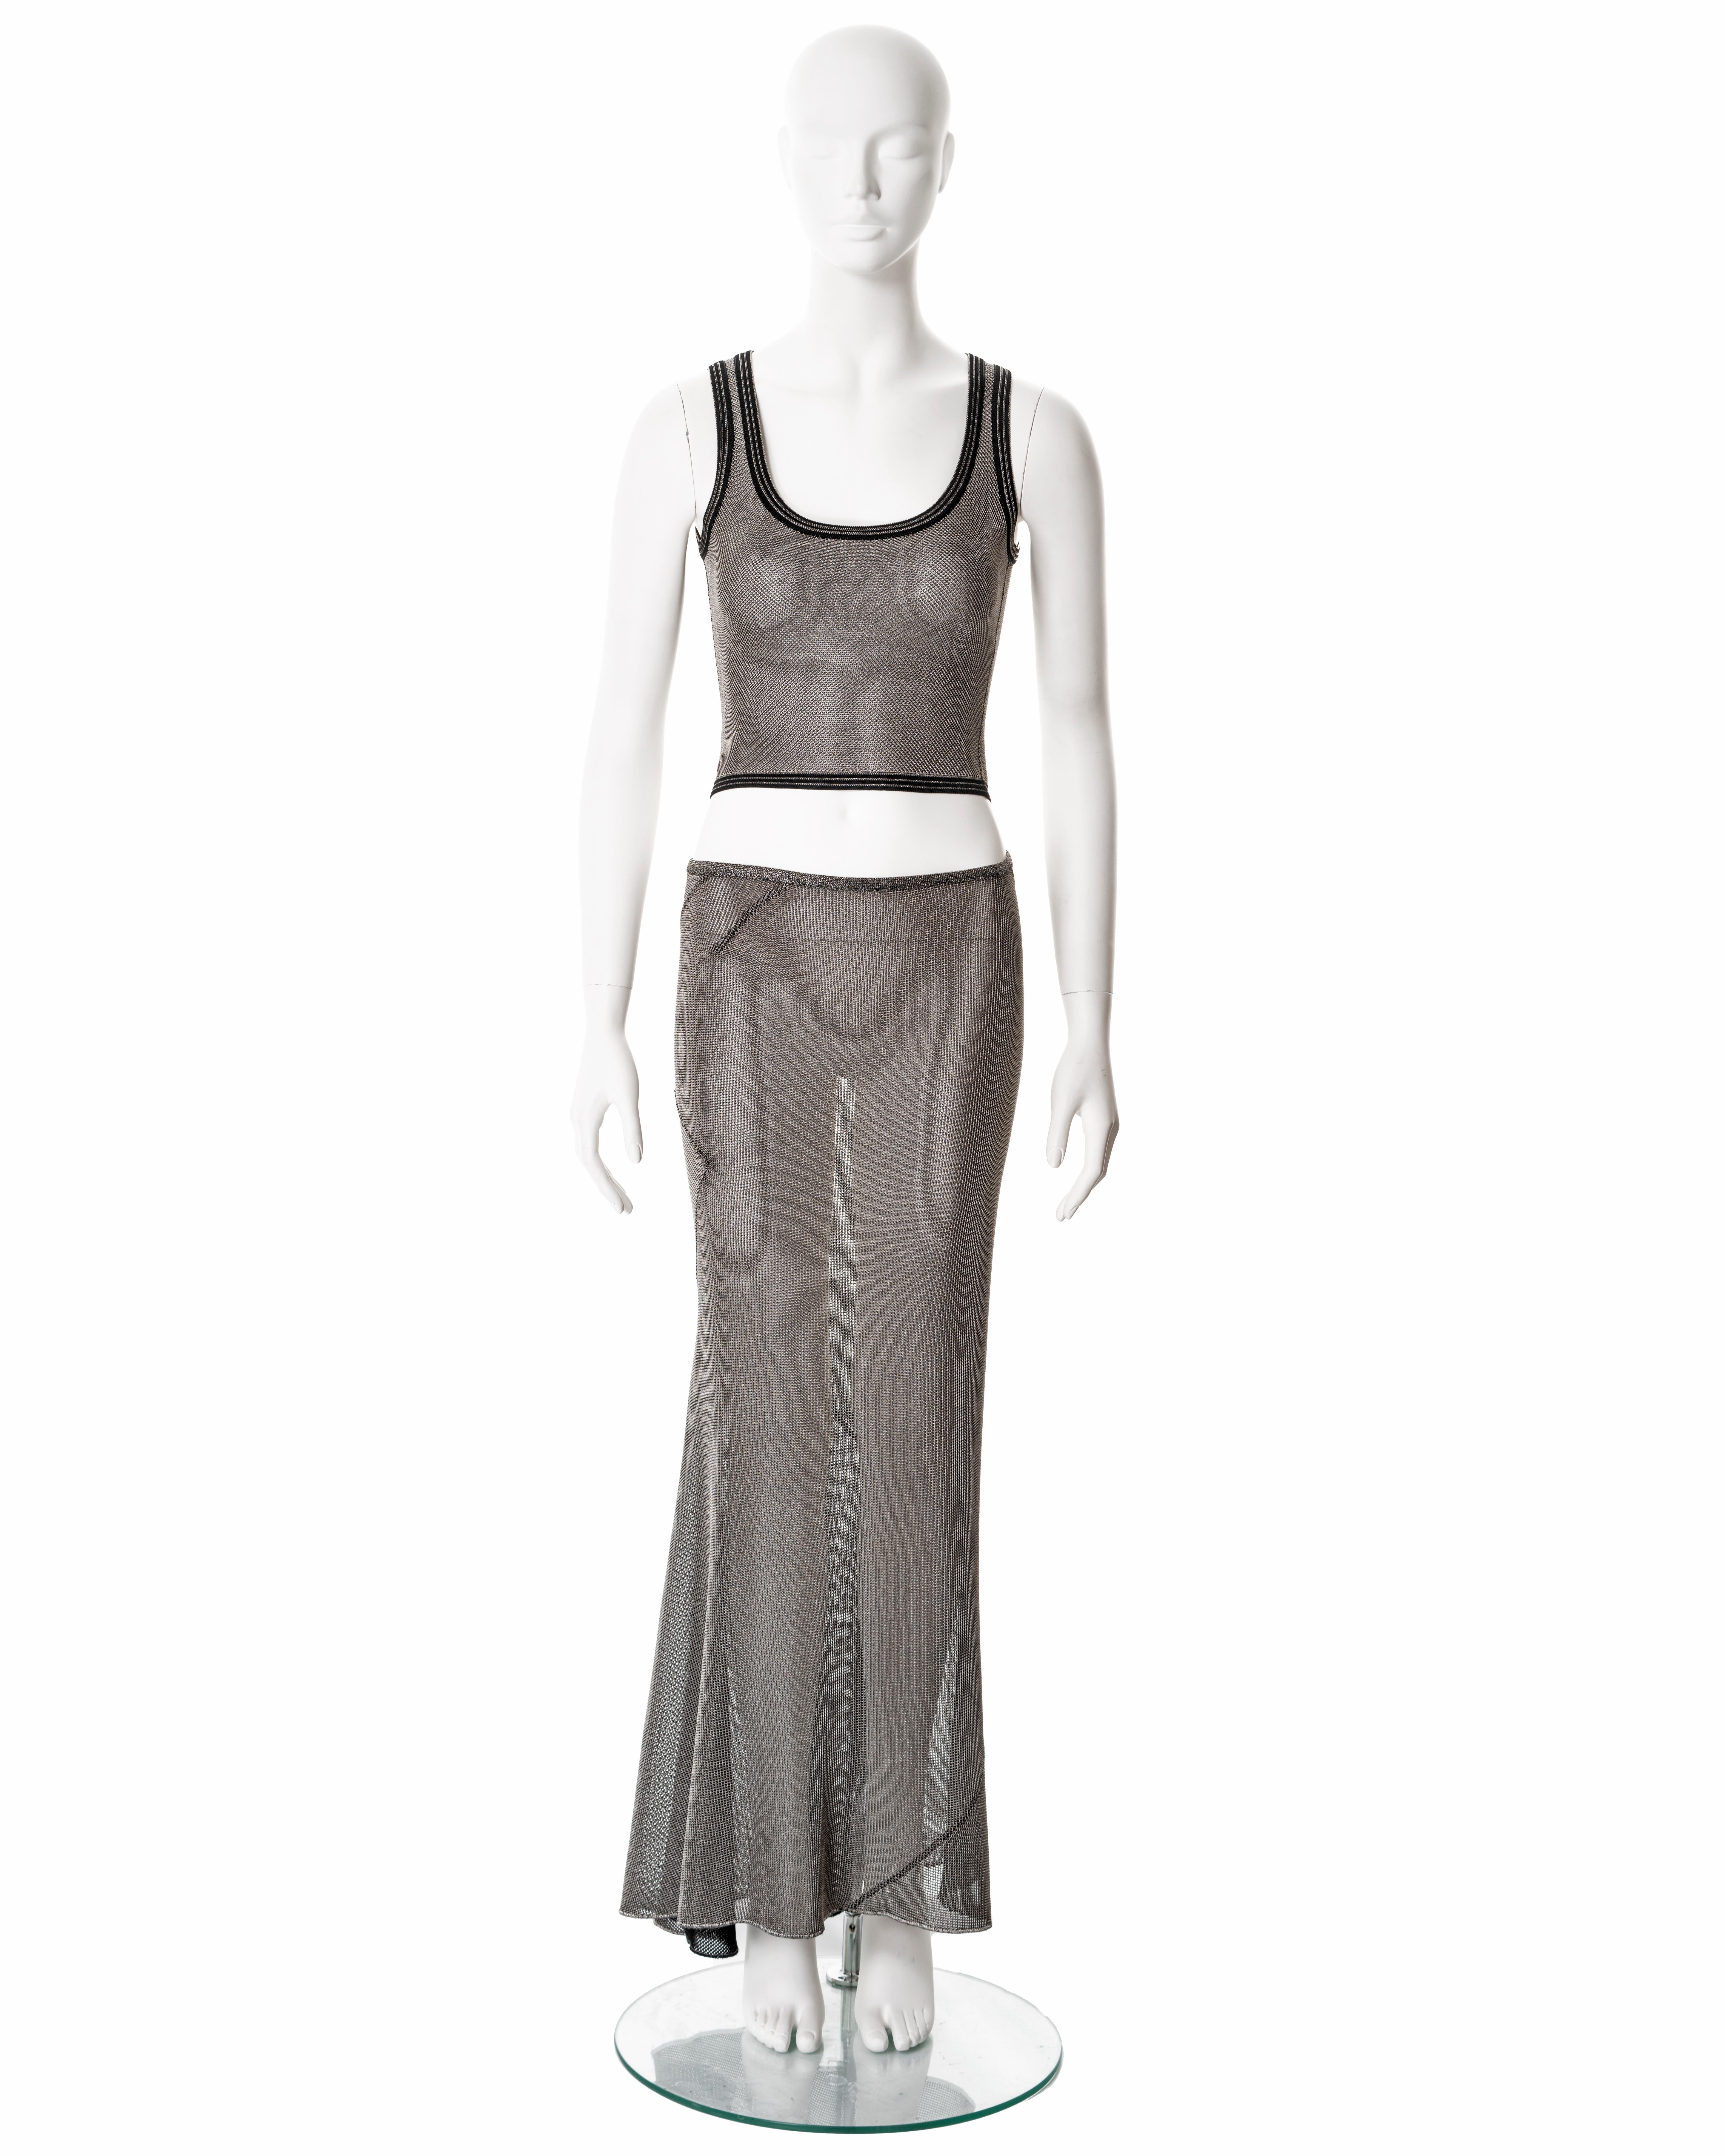 ▪ Azzedine Alaia 2-piece 
▪ Sold by One of a Kind Archive
▪ Fall-Winter 2001
▪ Constructed from metallic silver lurex knit 
▪ Cropped scoop-neck tank
▪ Bias-cut maxi skirt 
▪ Size 'XS'
▪ Made in Italy  

All photographs in this listing EXCLUDING any